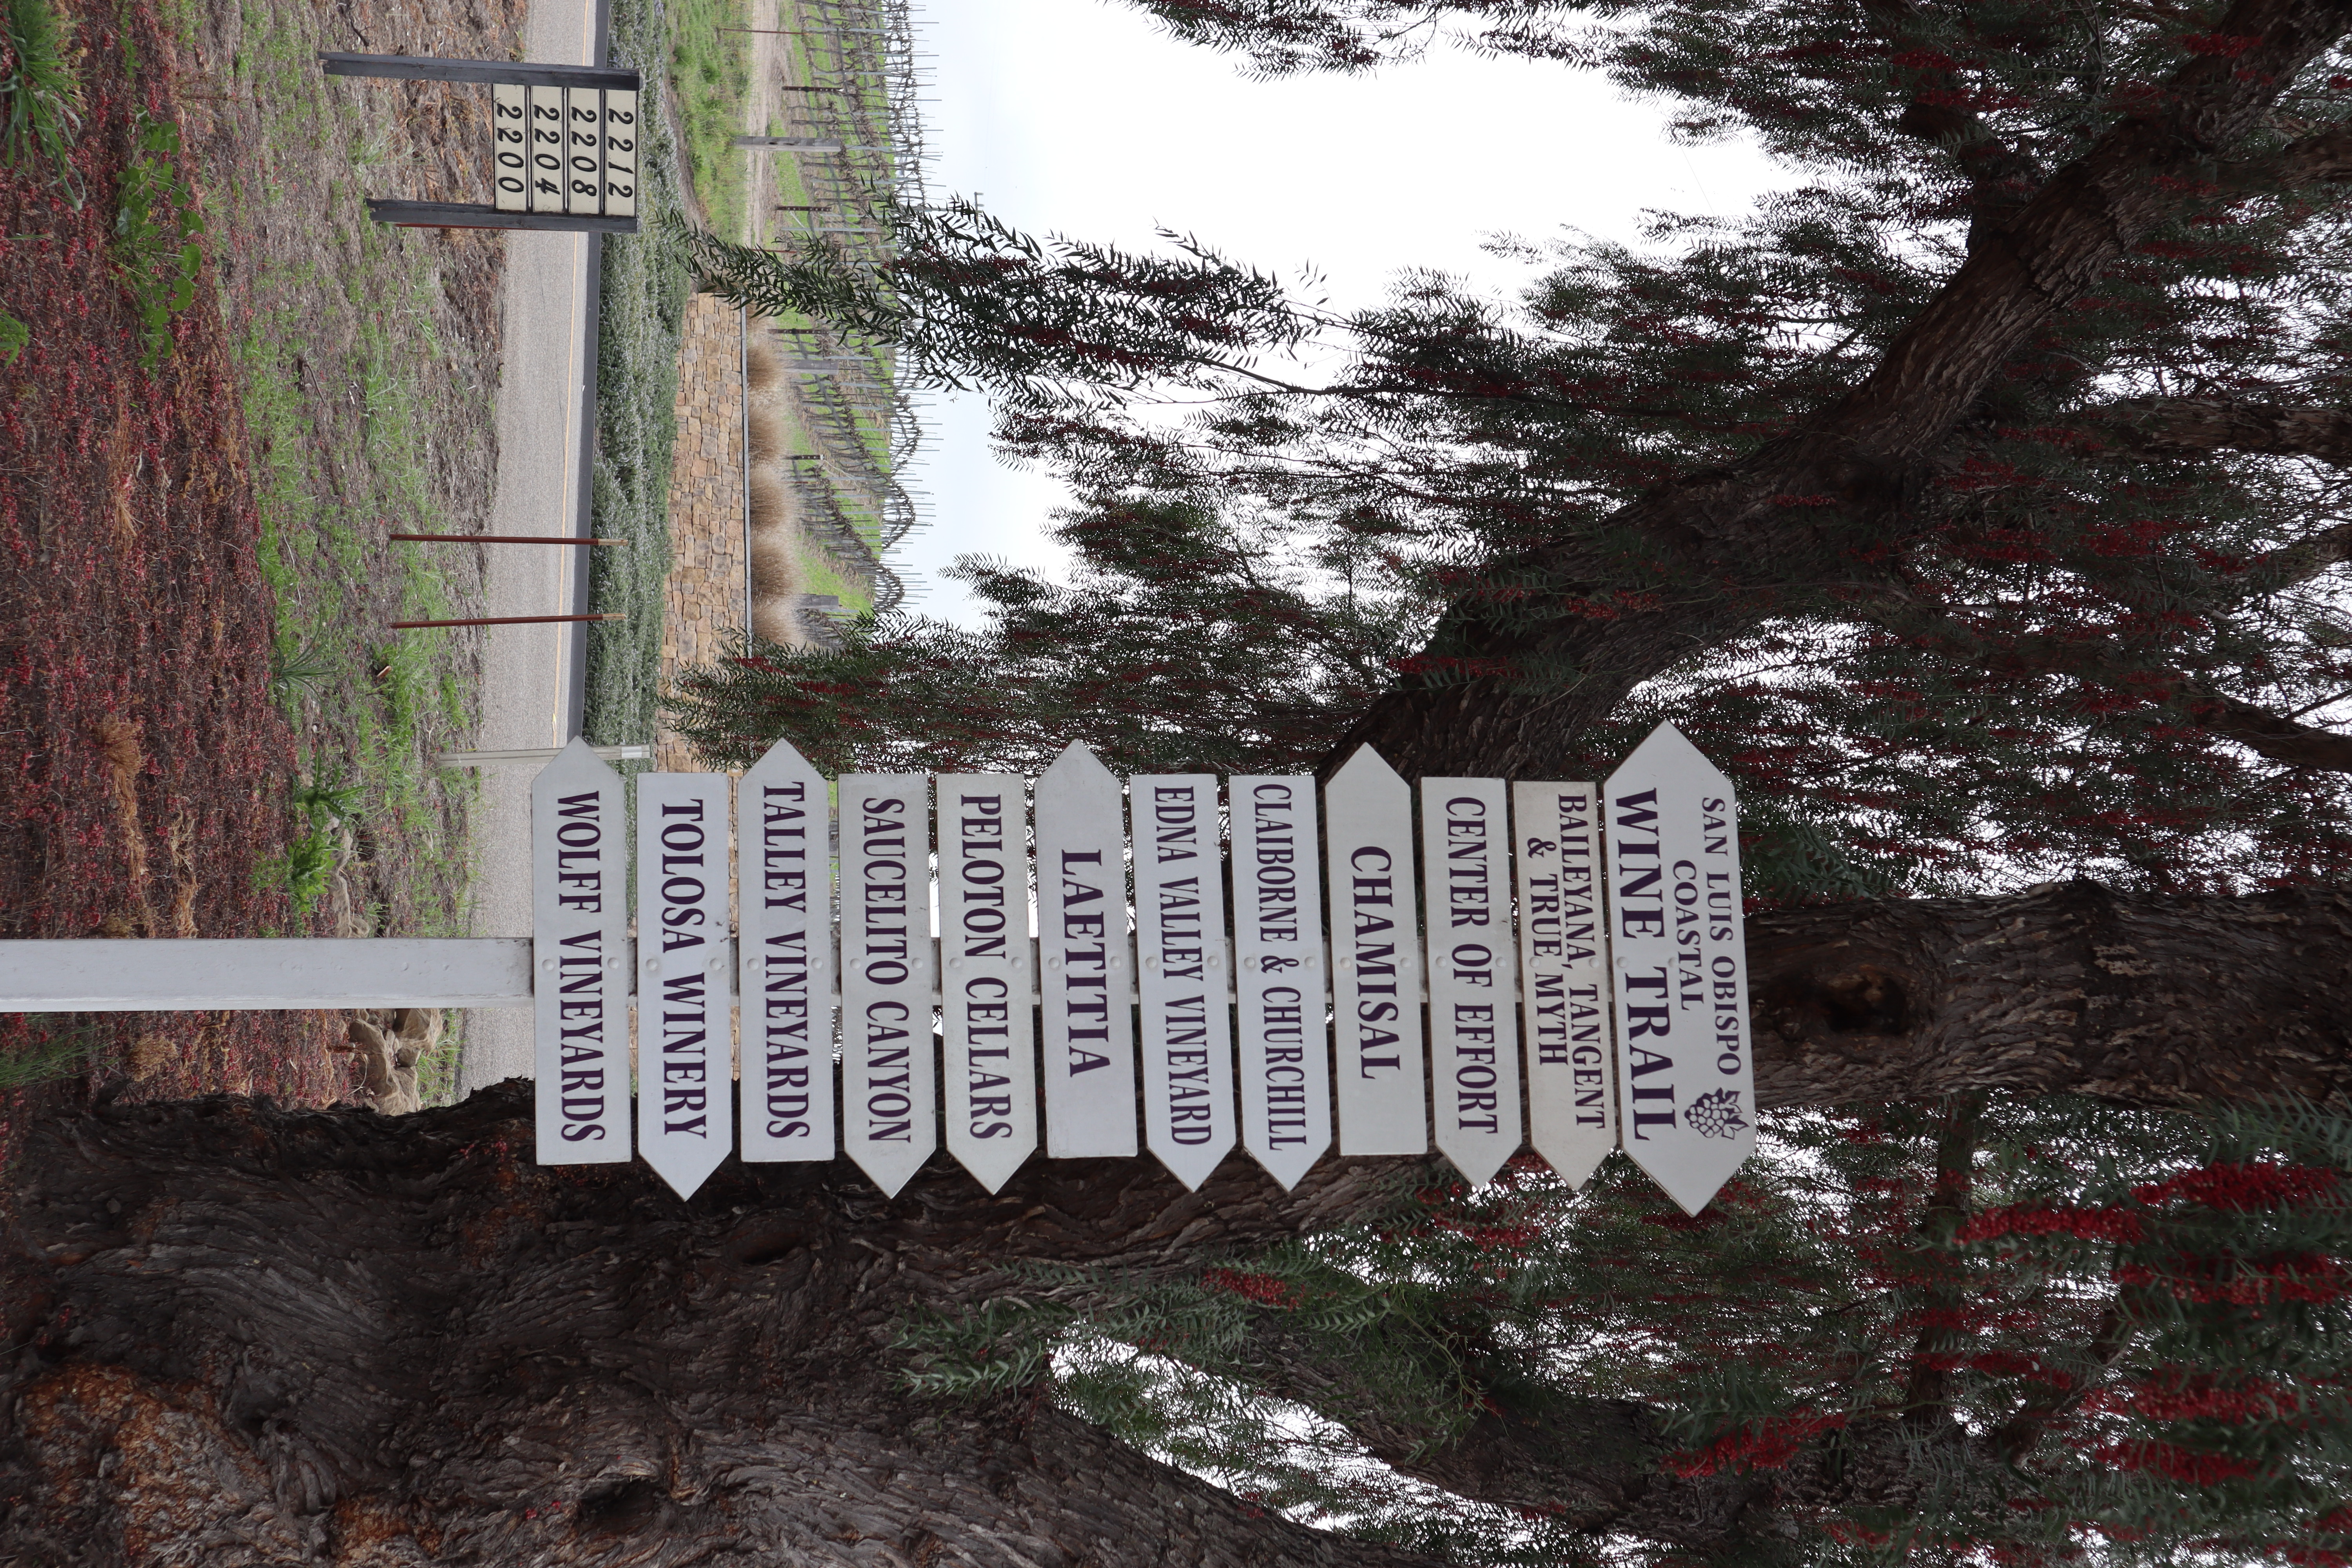 Signpost for wineries of Edna Valley